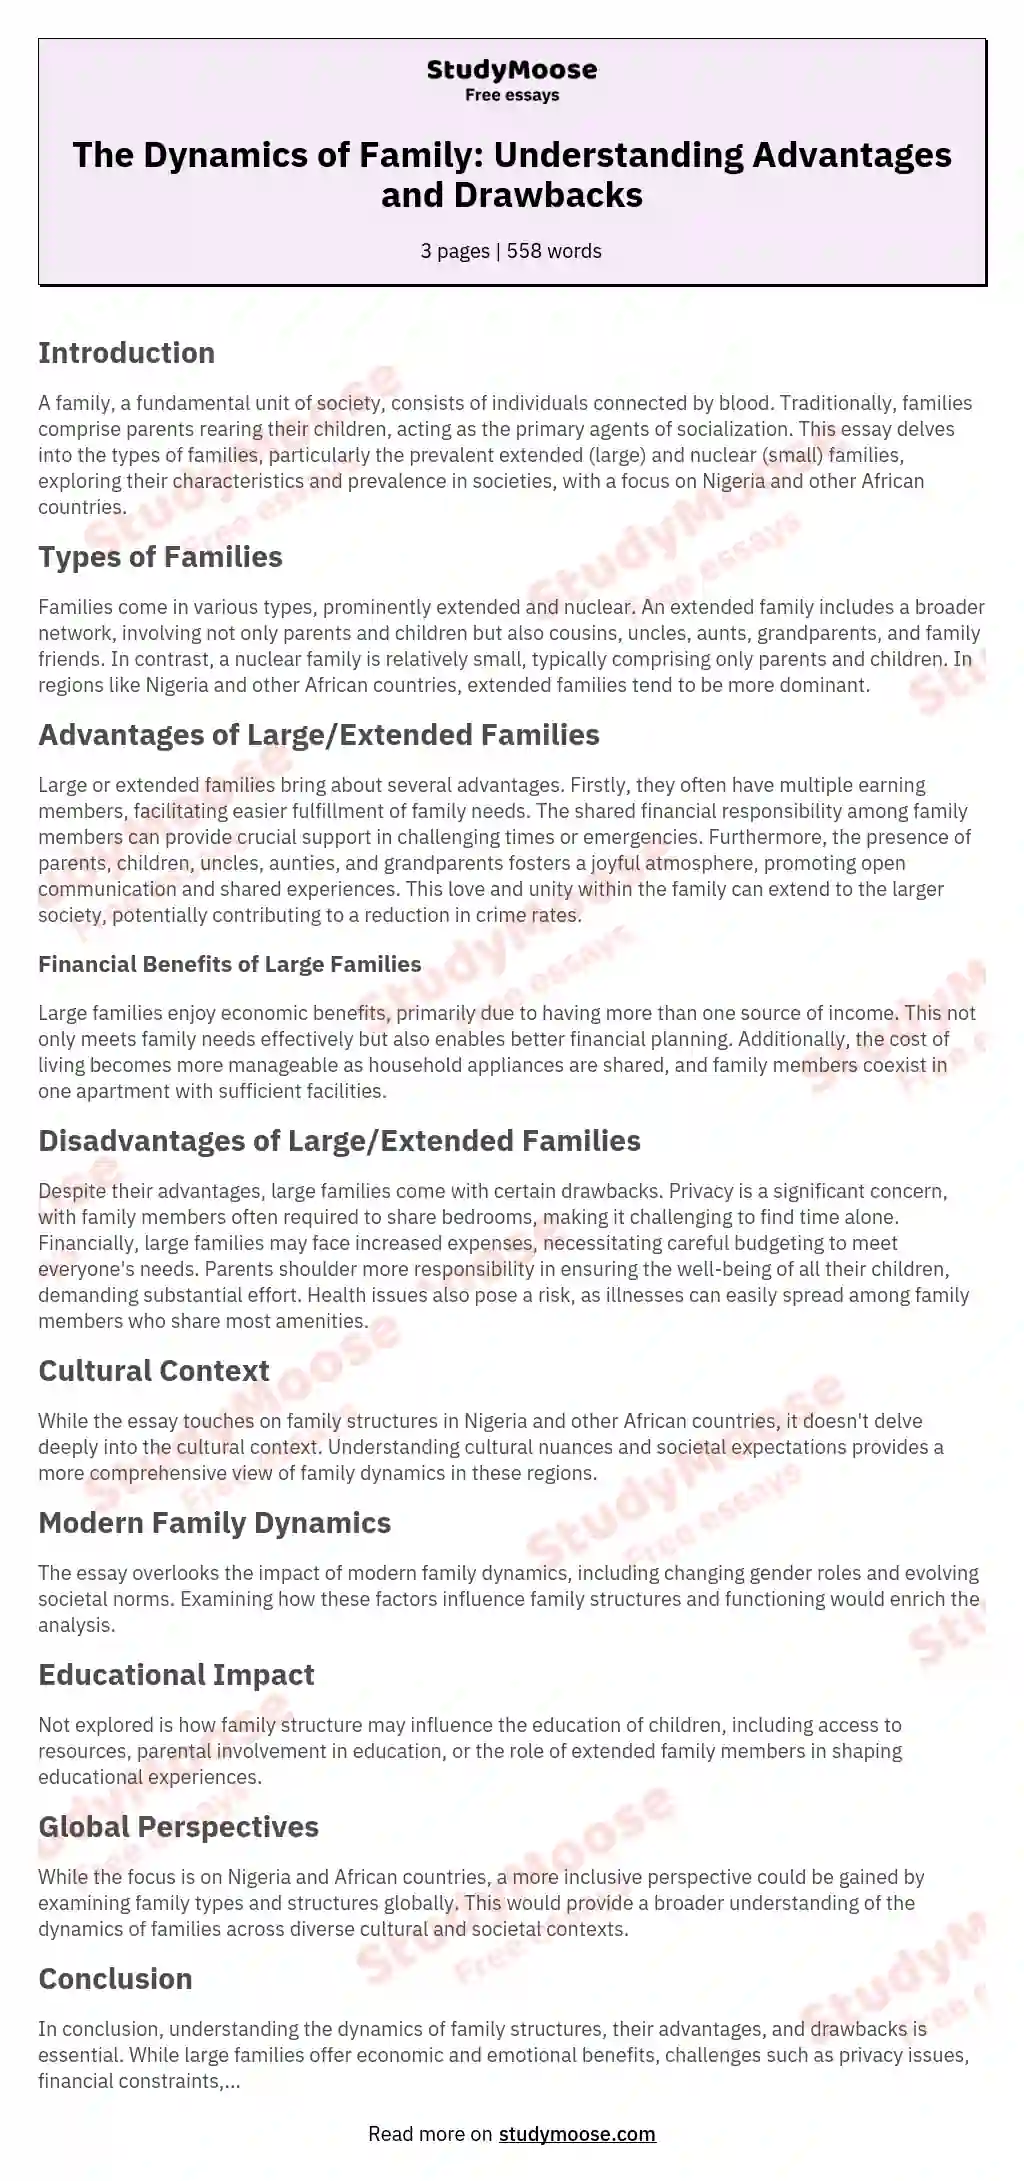 The Dynamics of Family: Understanding Advantages and Drawbacks essay